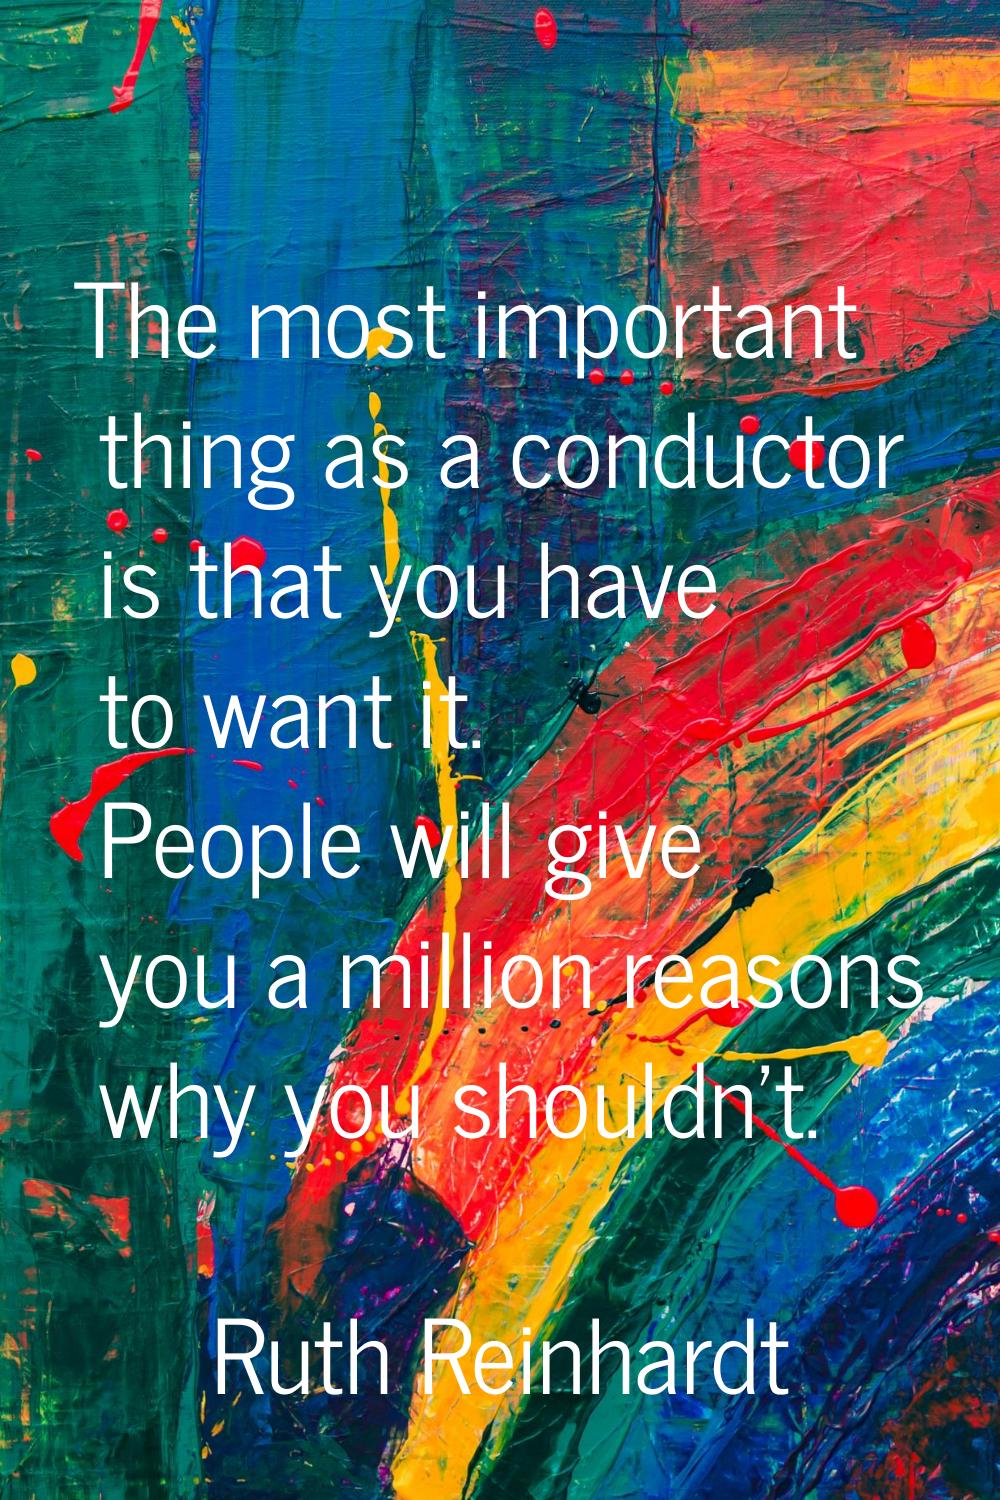 The most important thing as a conductor is that you have to want it. People will give you a million